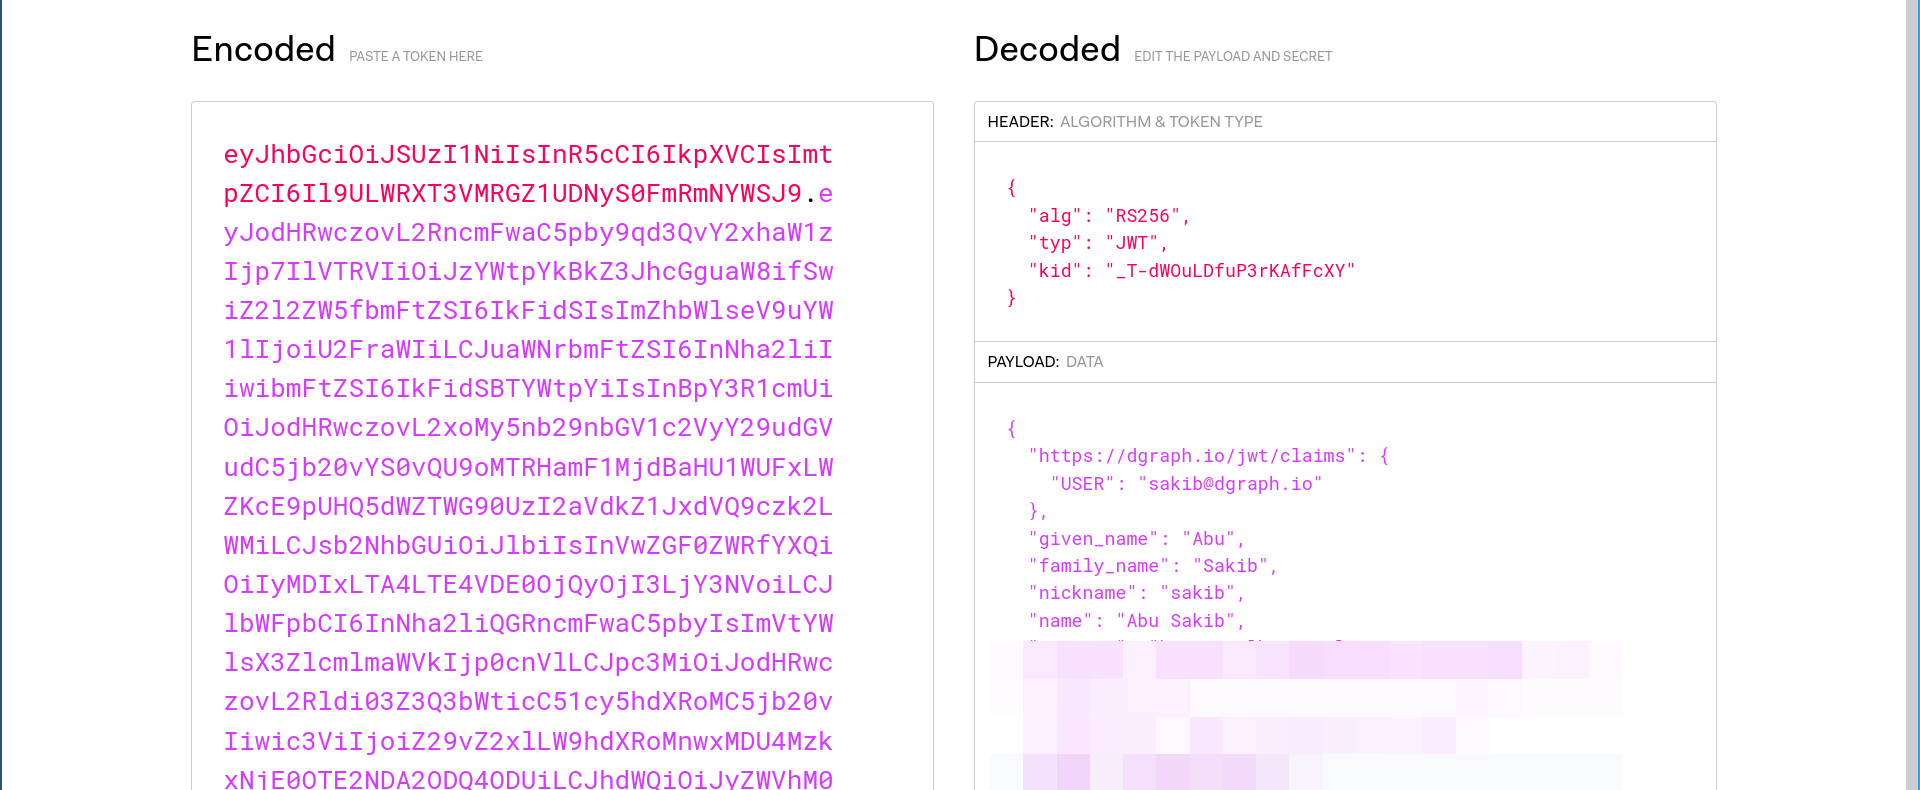 Decoded value of a JWT token id_token from Auth0 in the jwt.io